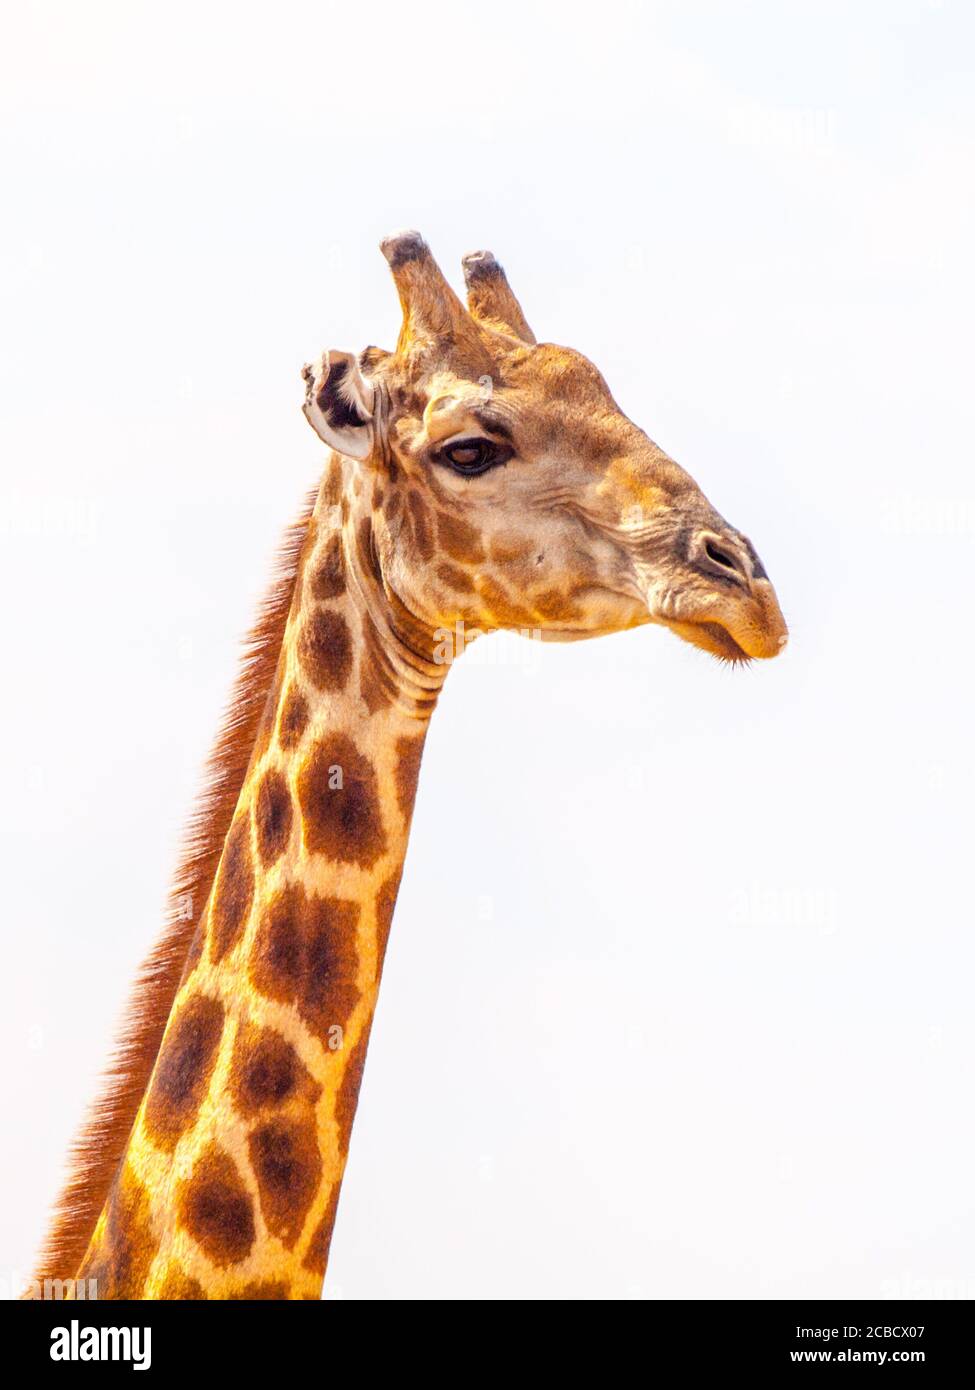 Close-up portrait of giraffe with head and long neck on white background, African wildlife in Etosha National Park, Namibia, Africa. Stock Photo